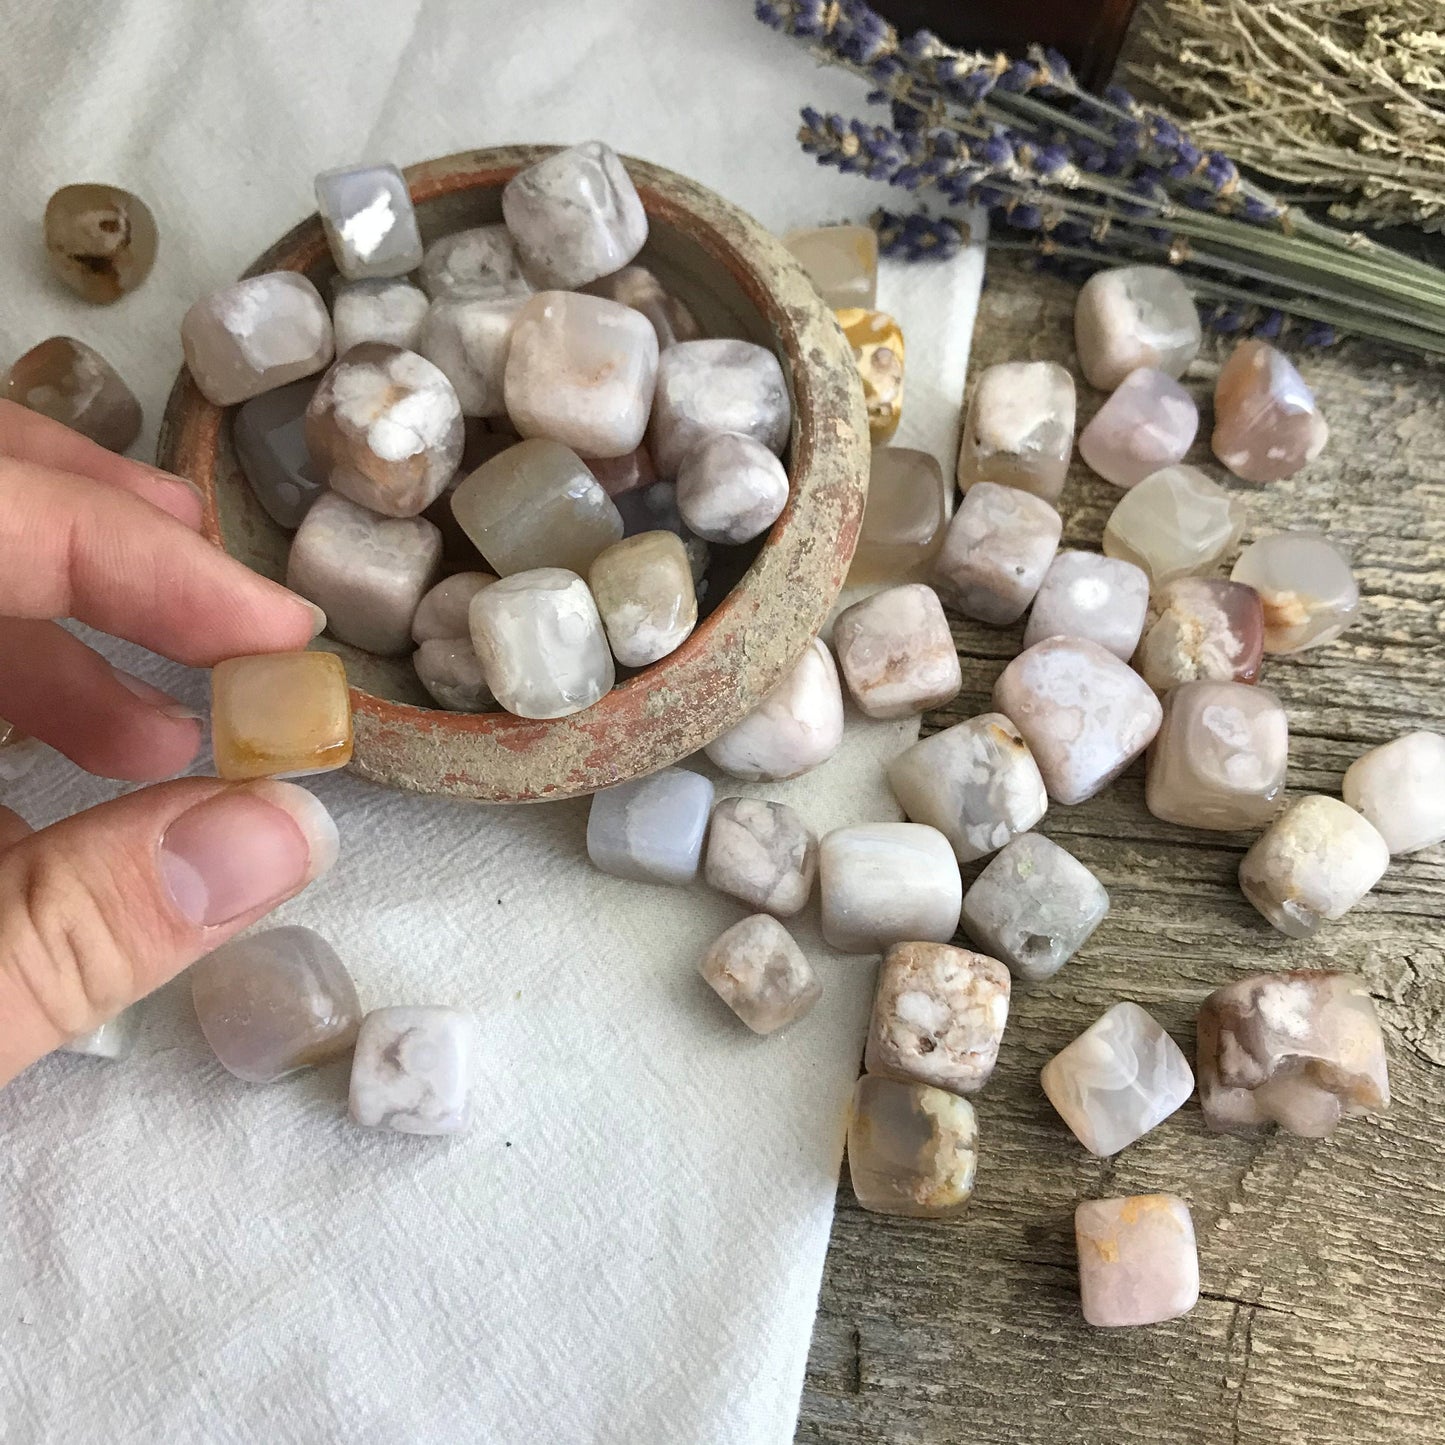 Polished Flower Agate, Cherry Blossom Agate BIN-1332 Tumbled Stone (Approx. 5/8" - 3/4") for Wire Wrapping or Crystal Grid Supply